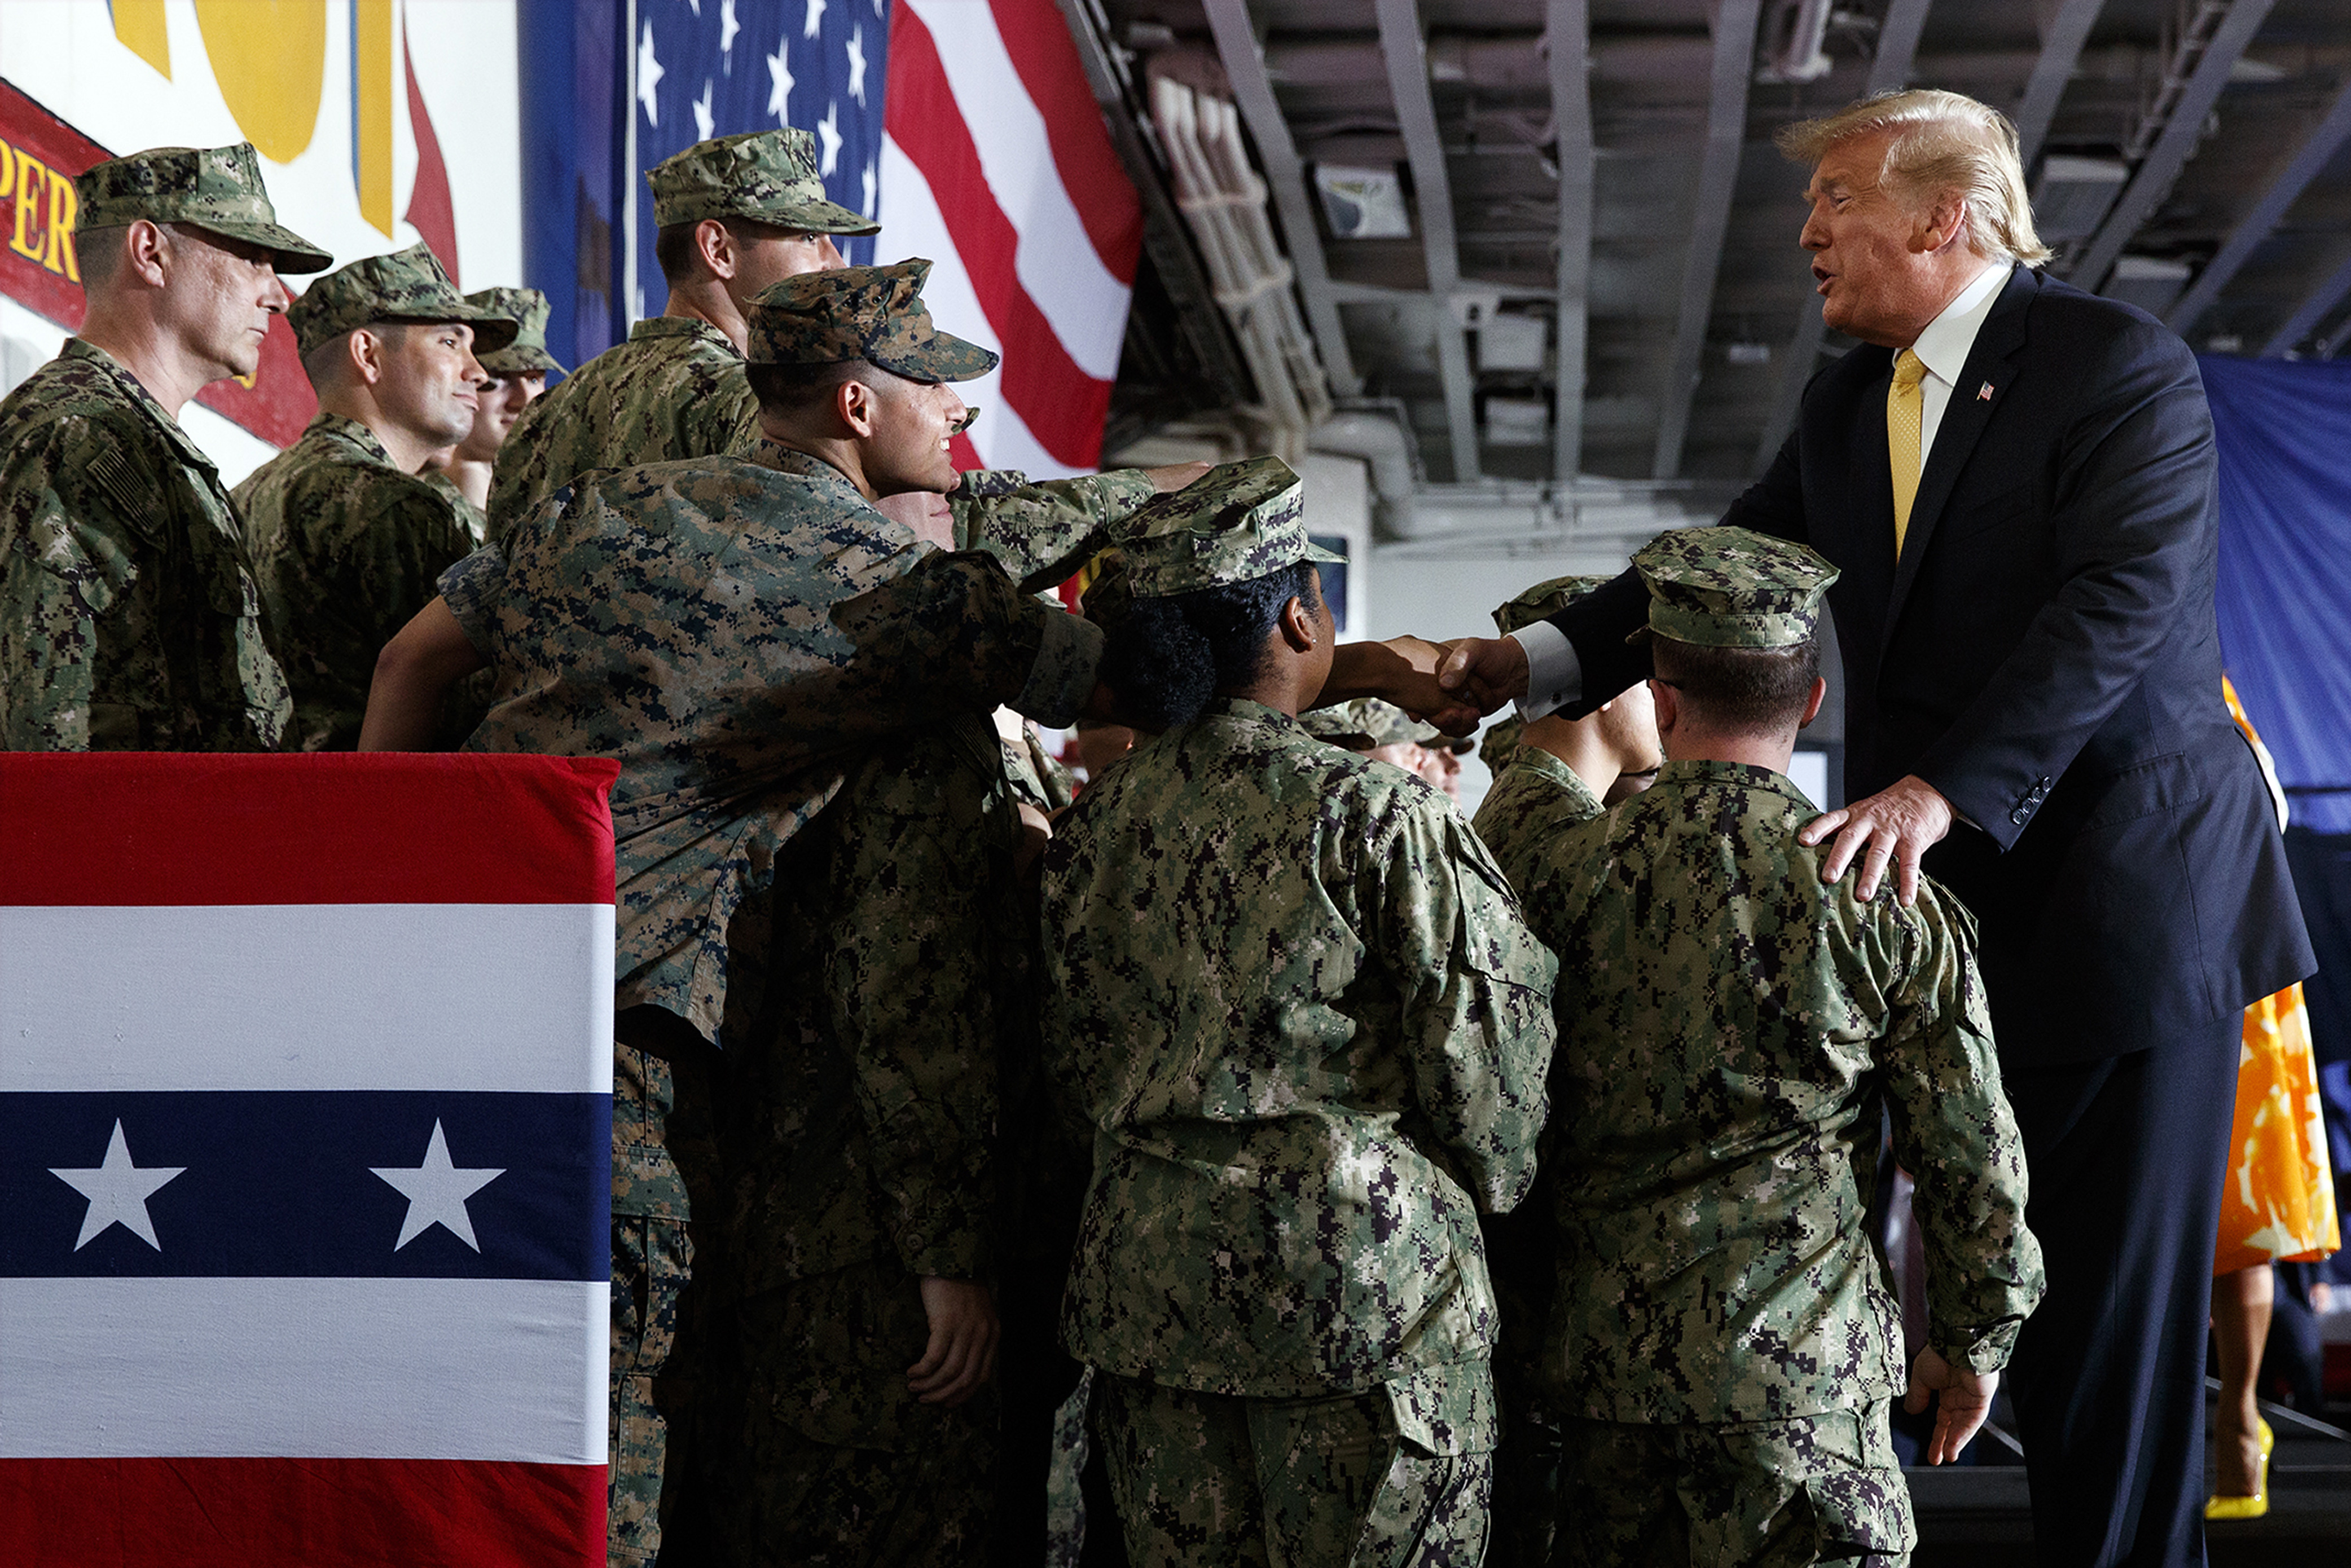 President Donald Trump greets troops after speaking at a Memorial Day event aboard the USS Wasp, Tuesday, May 28, 2019, in Yokosuka, Japan. (AP Photo/Evan Vucci)